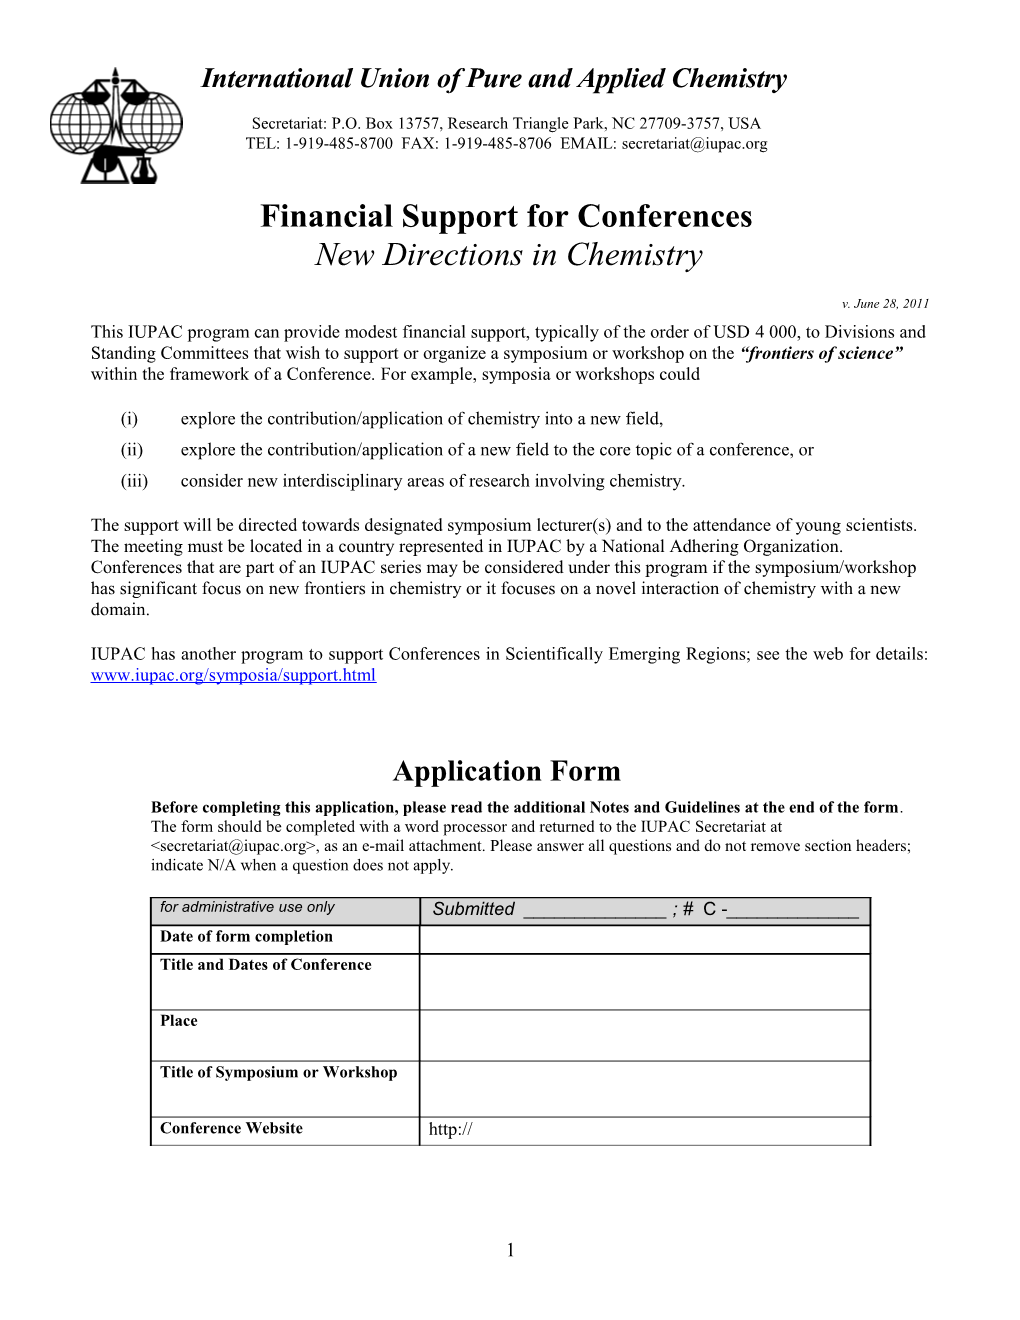 Financial Support for Conferences